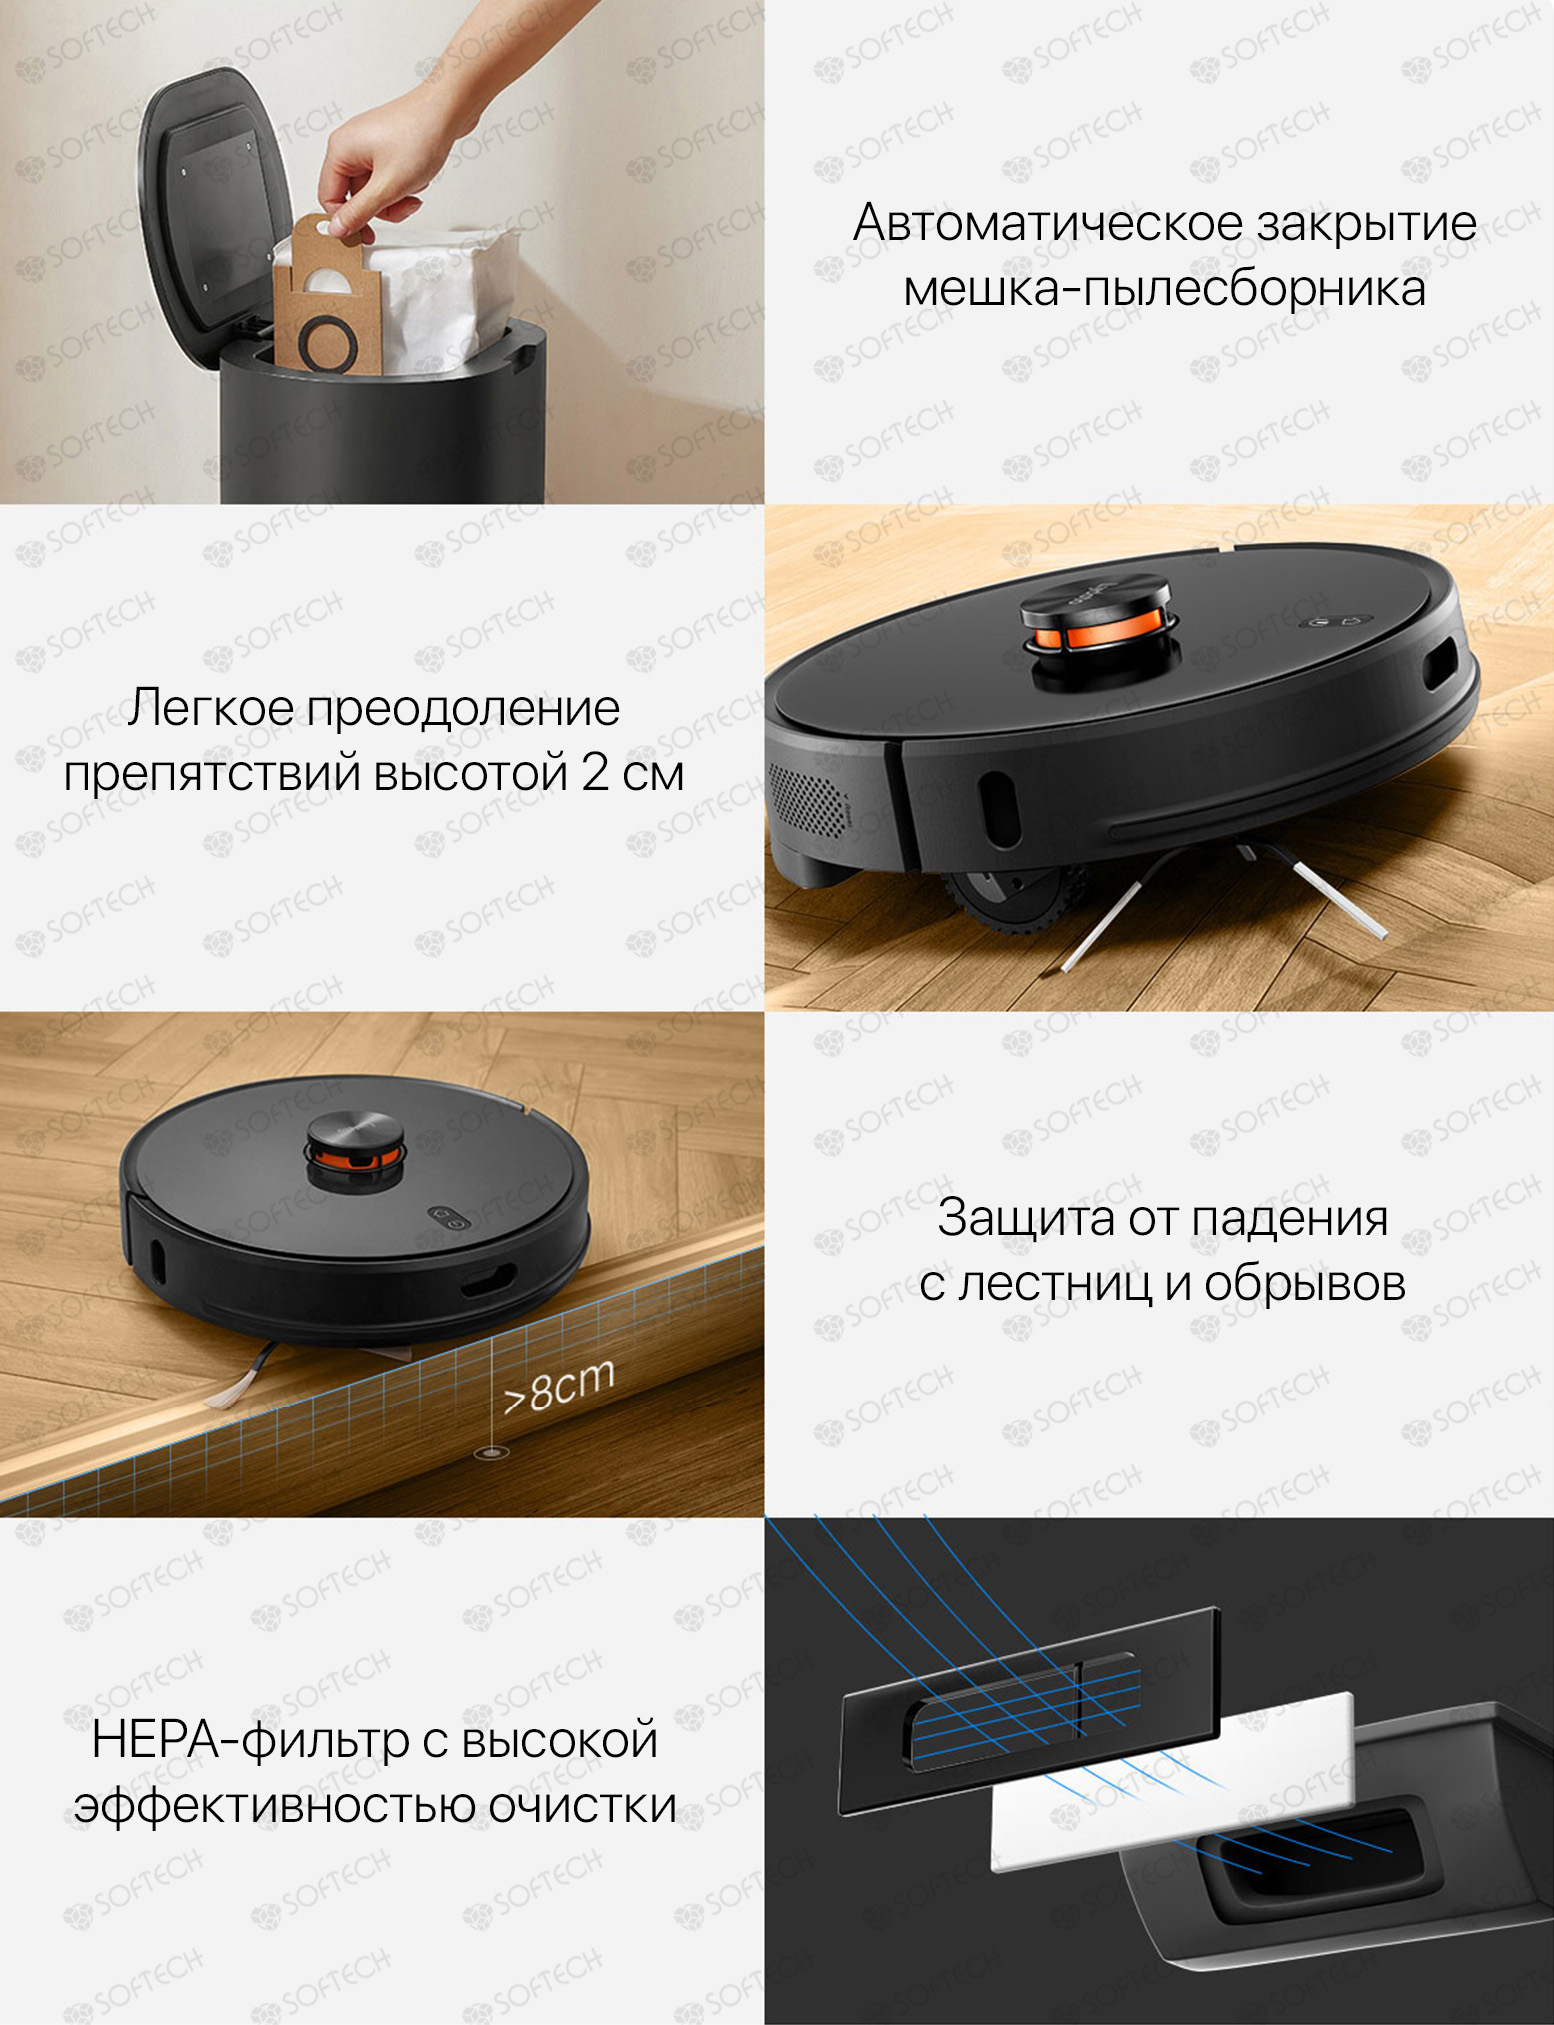 Xiaomi lydsto robot vacuum cleaner. Lydsto r1 робот-пылесос. Робот-пылесос Xiaomi lydsto. Робот-пылесос lydsto Robot Vacuum r1 Pro eu White. Робот-пылесос Xiaomi lydsto sweeping and Mopping Robot r1 Pro Black eu.